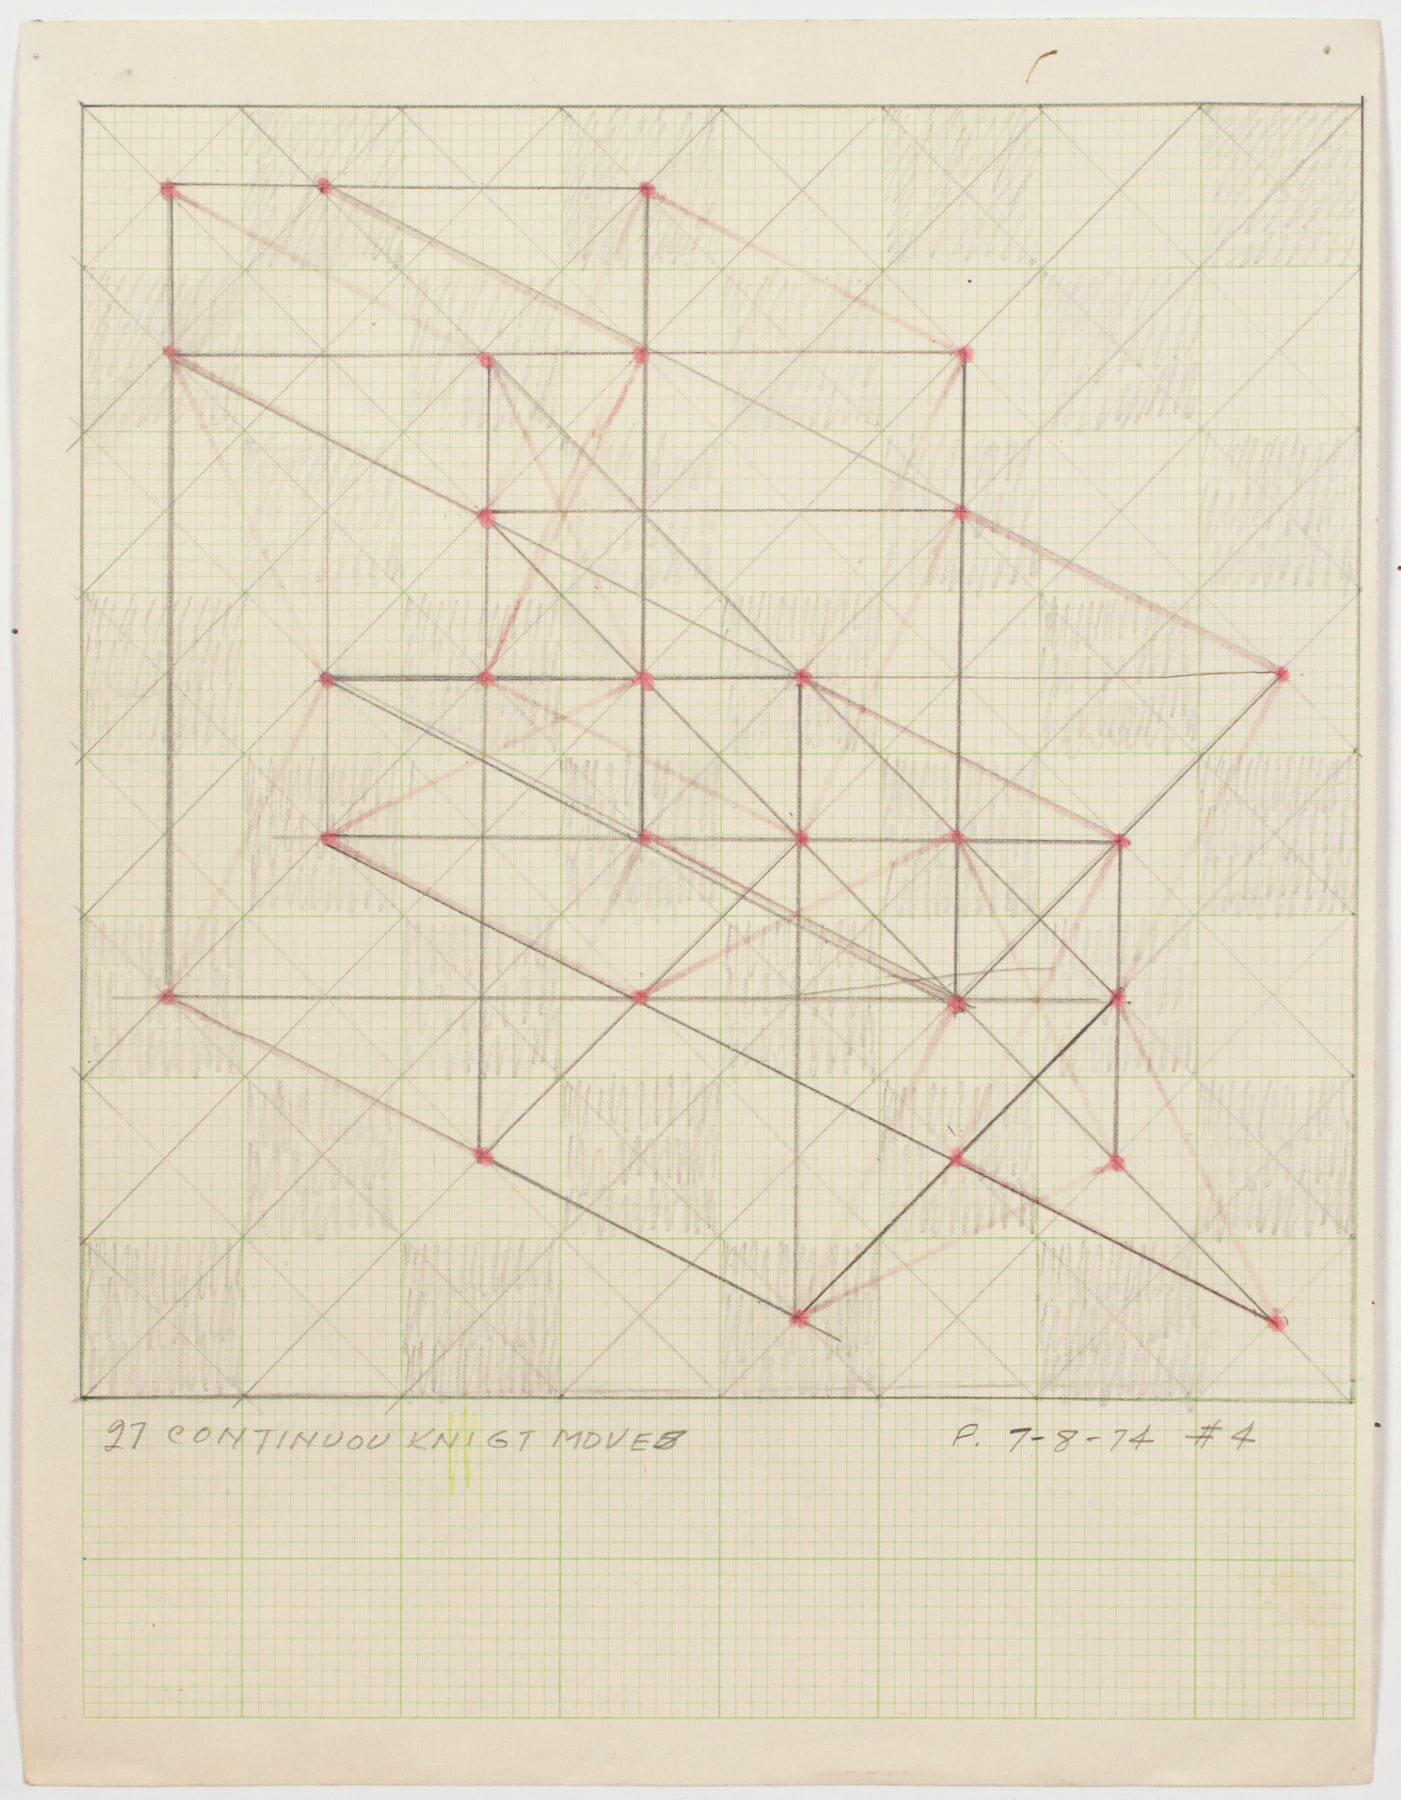 Jack Tworkov, 27 Continuous Knight Moves (PT 74 #4), 1974